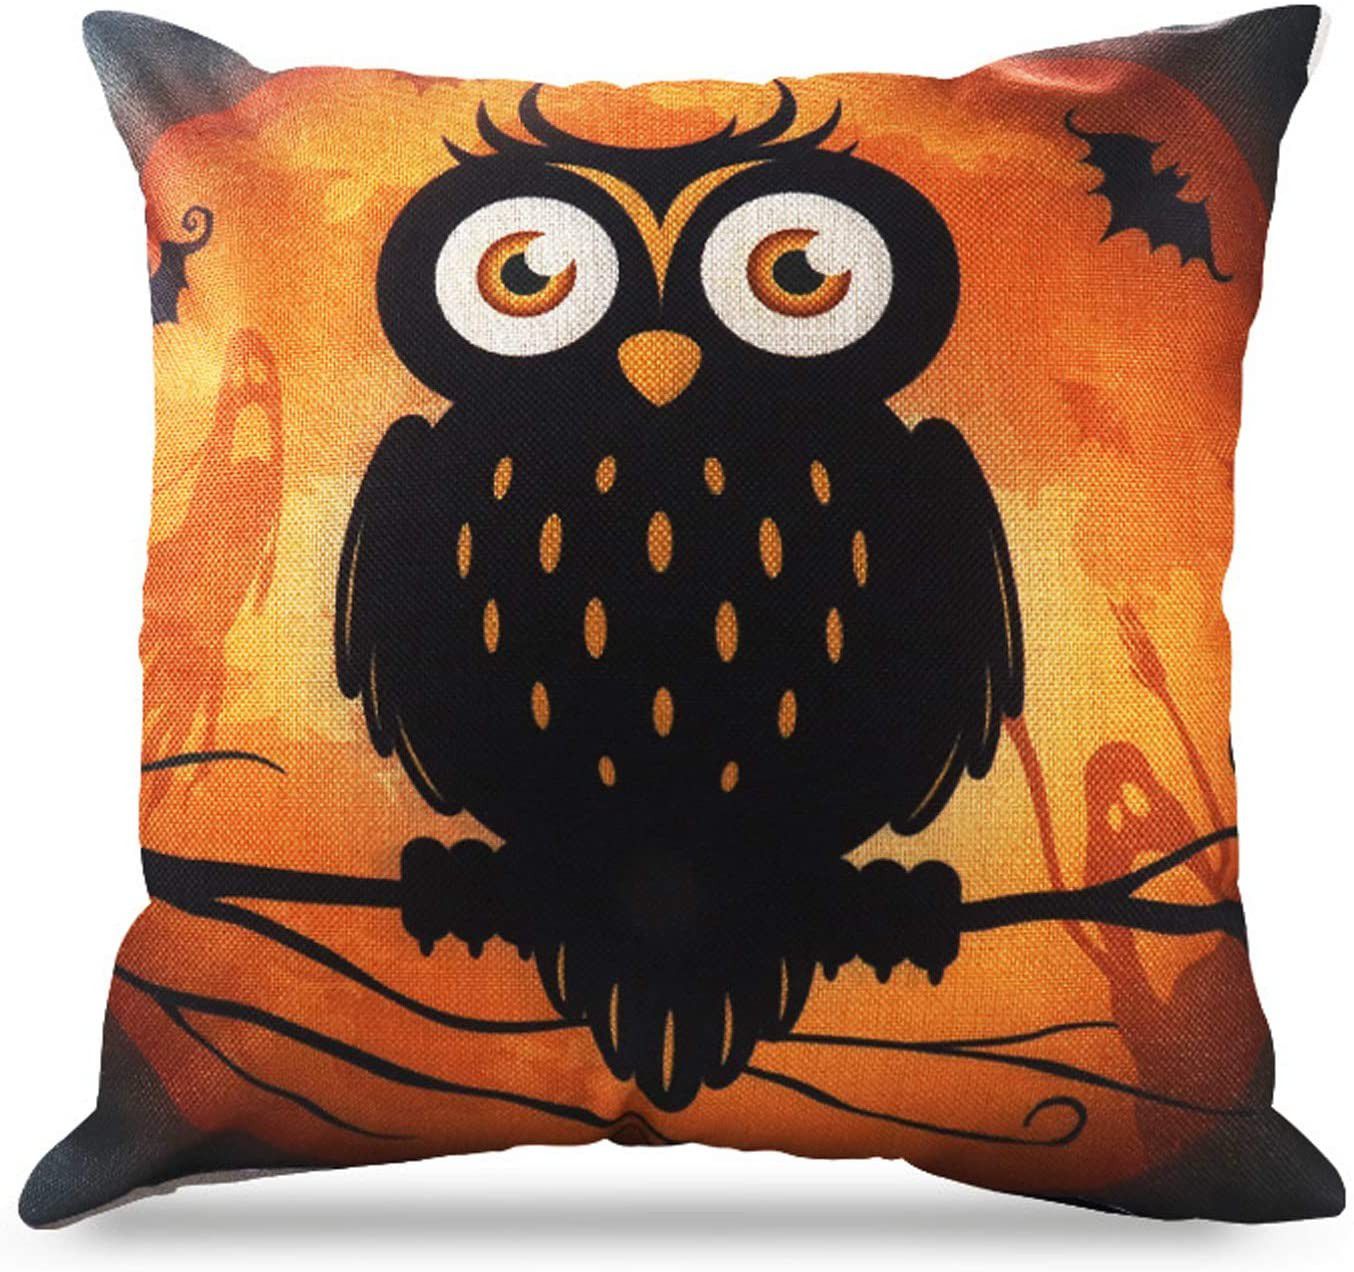 Brand New Halloween Throw Pillow Covers 18 x 18 Inch Owl/Bat/Witch/Castle Theme Sofa Home Decorative Cushion Pillow Case Bedroom Living Dining Seat